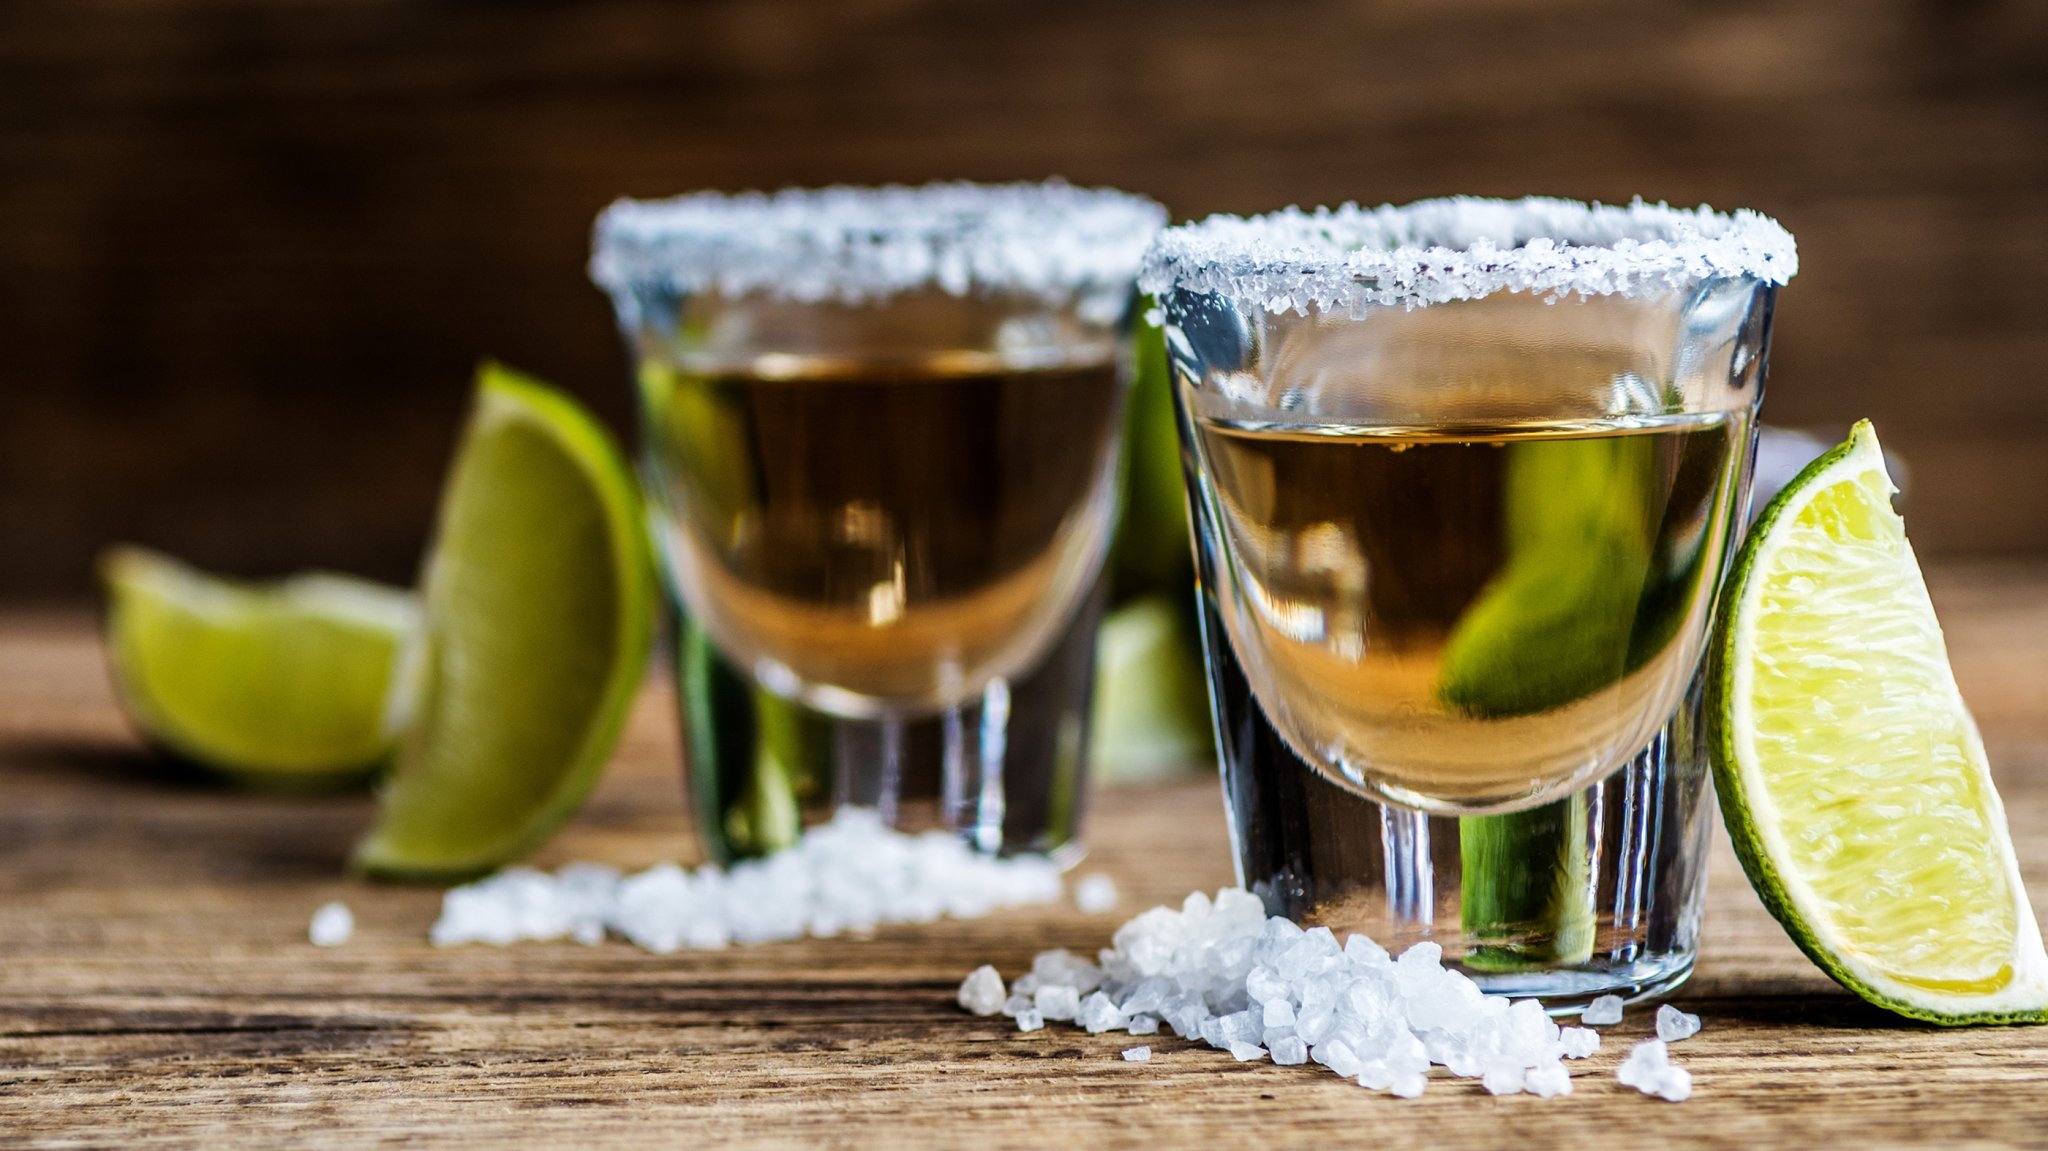 We've got some bad news for tequila drinkers